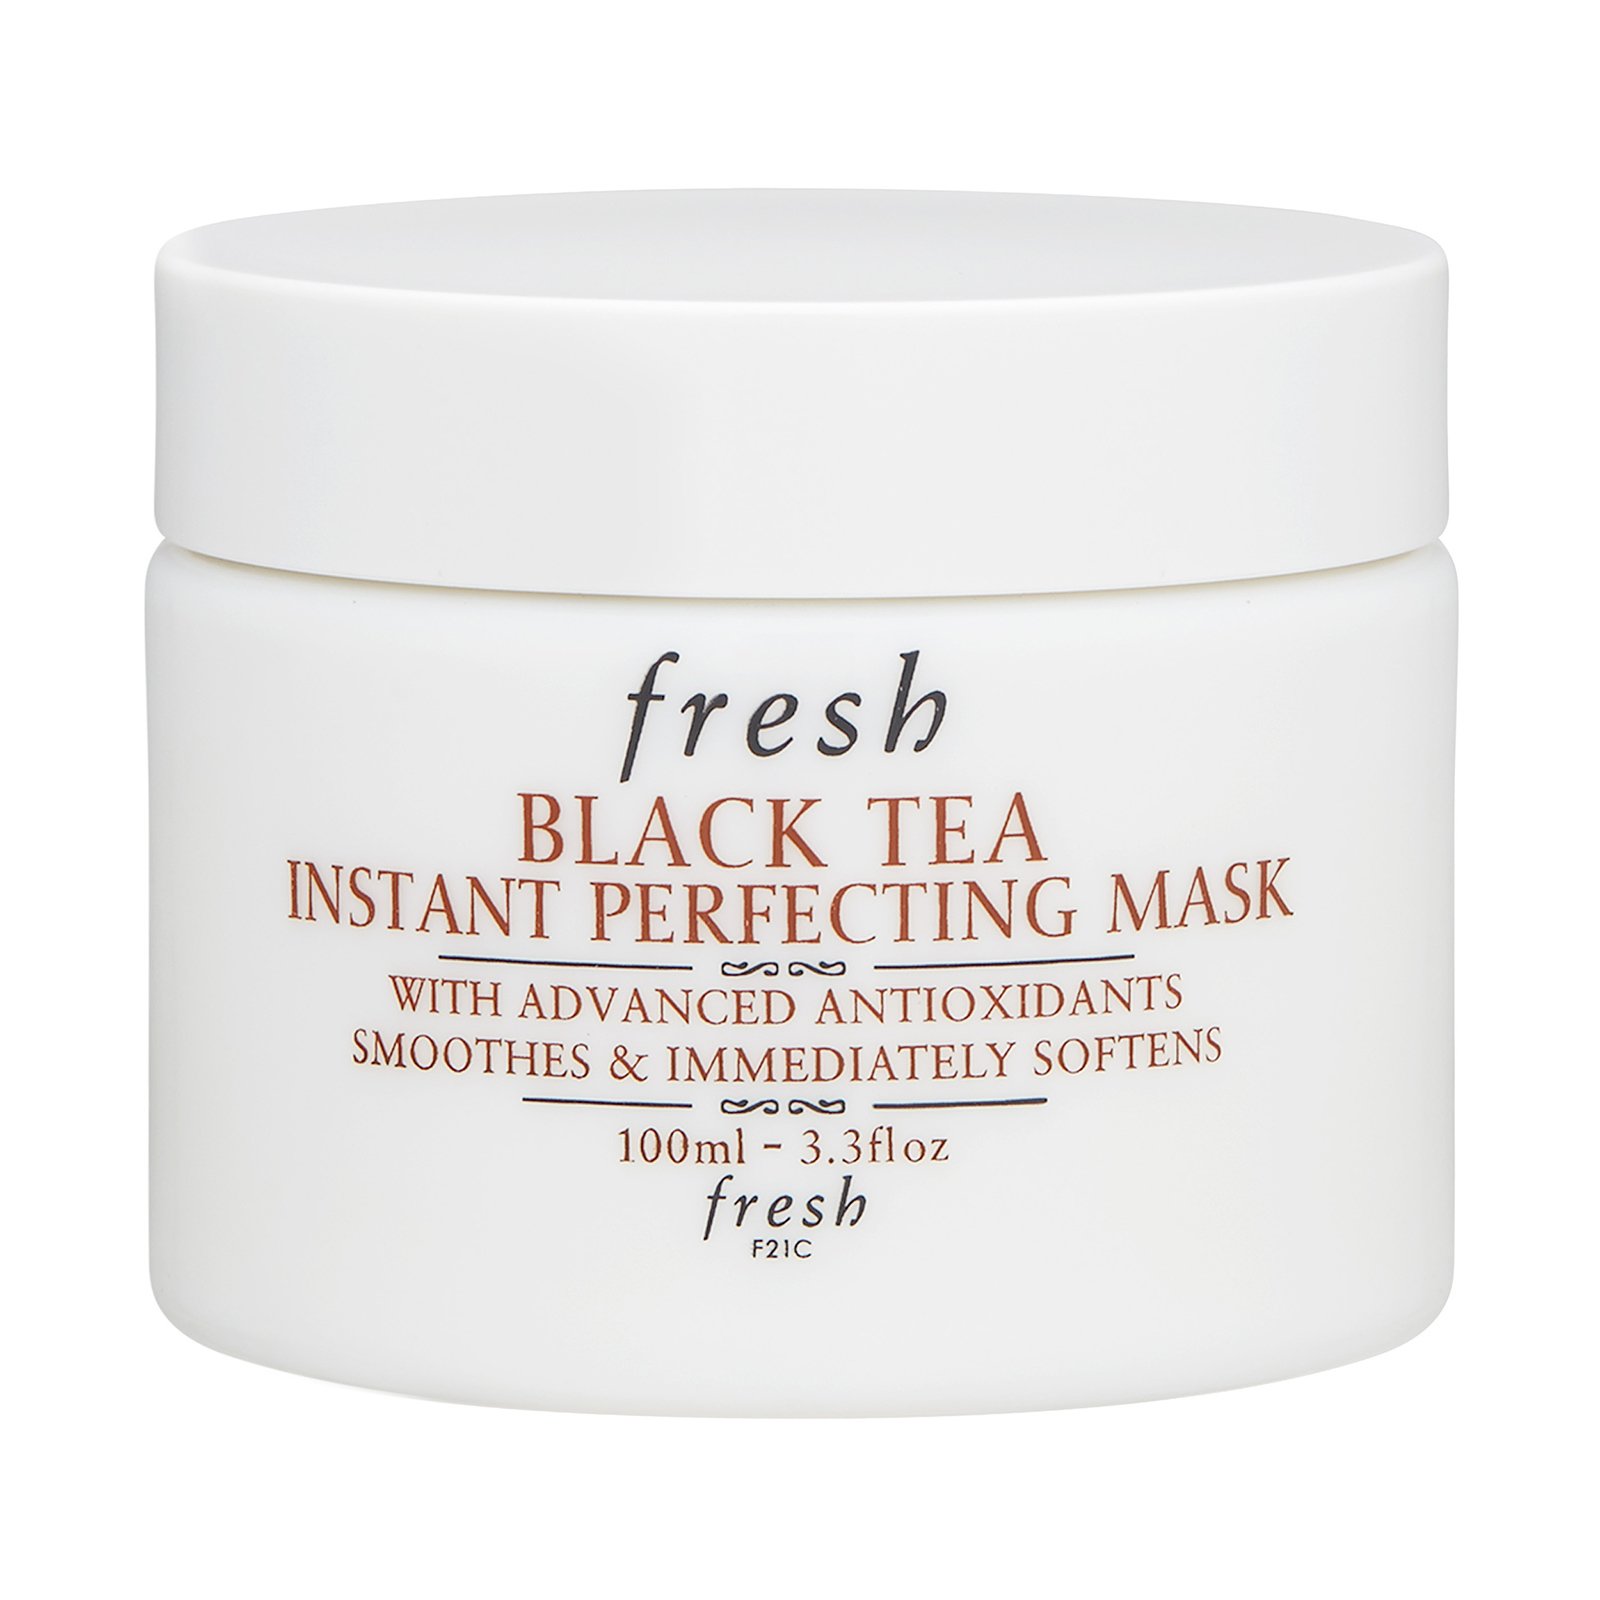 Instant Perfecting Mask